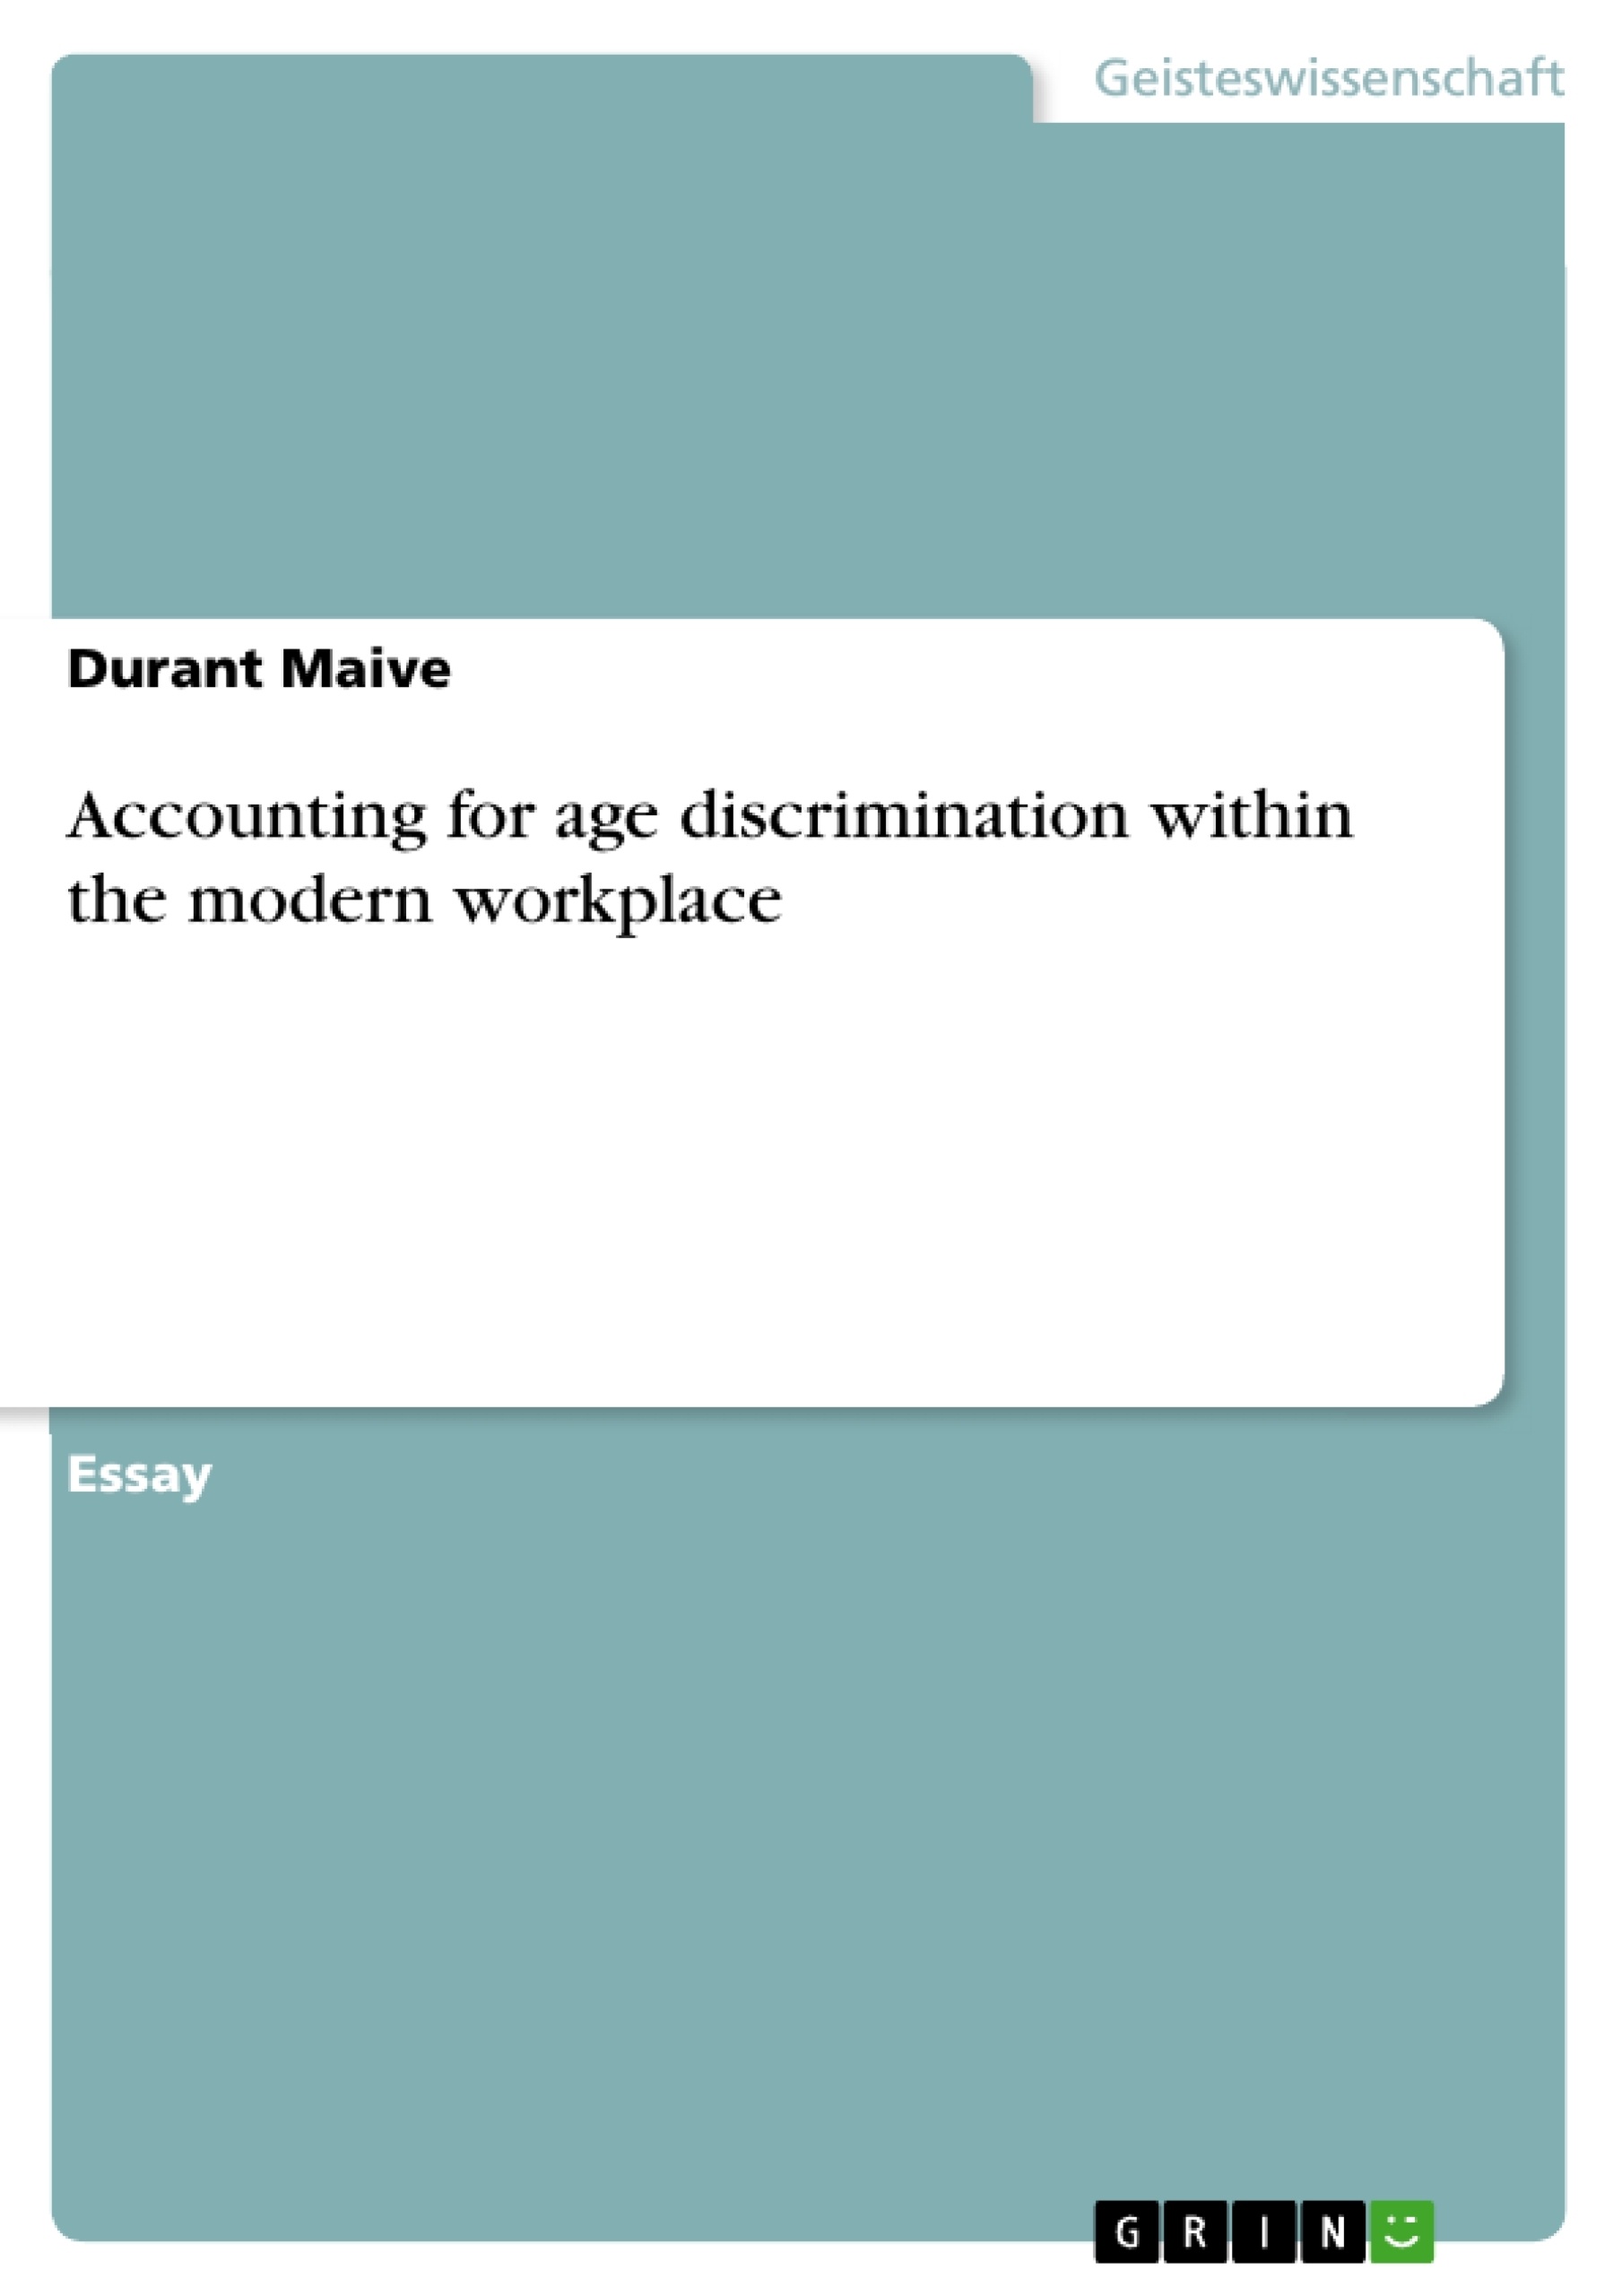 essay on age discrimination in the workplace